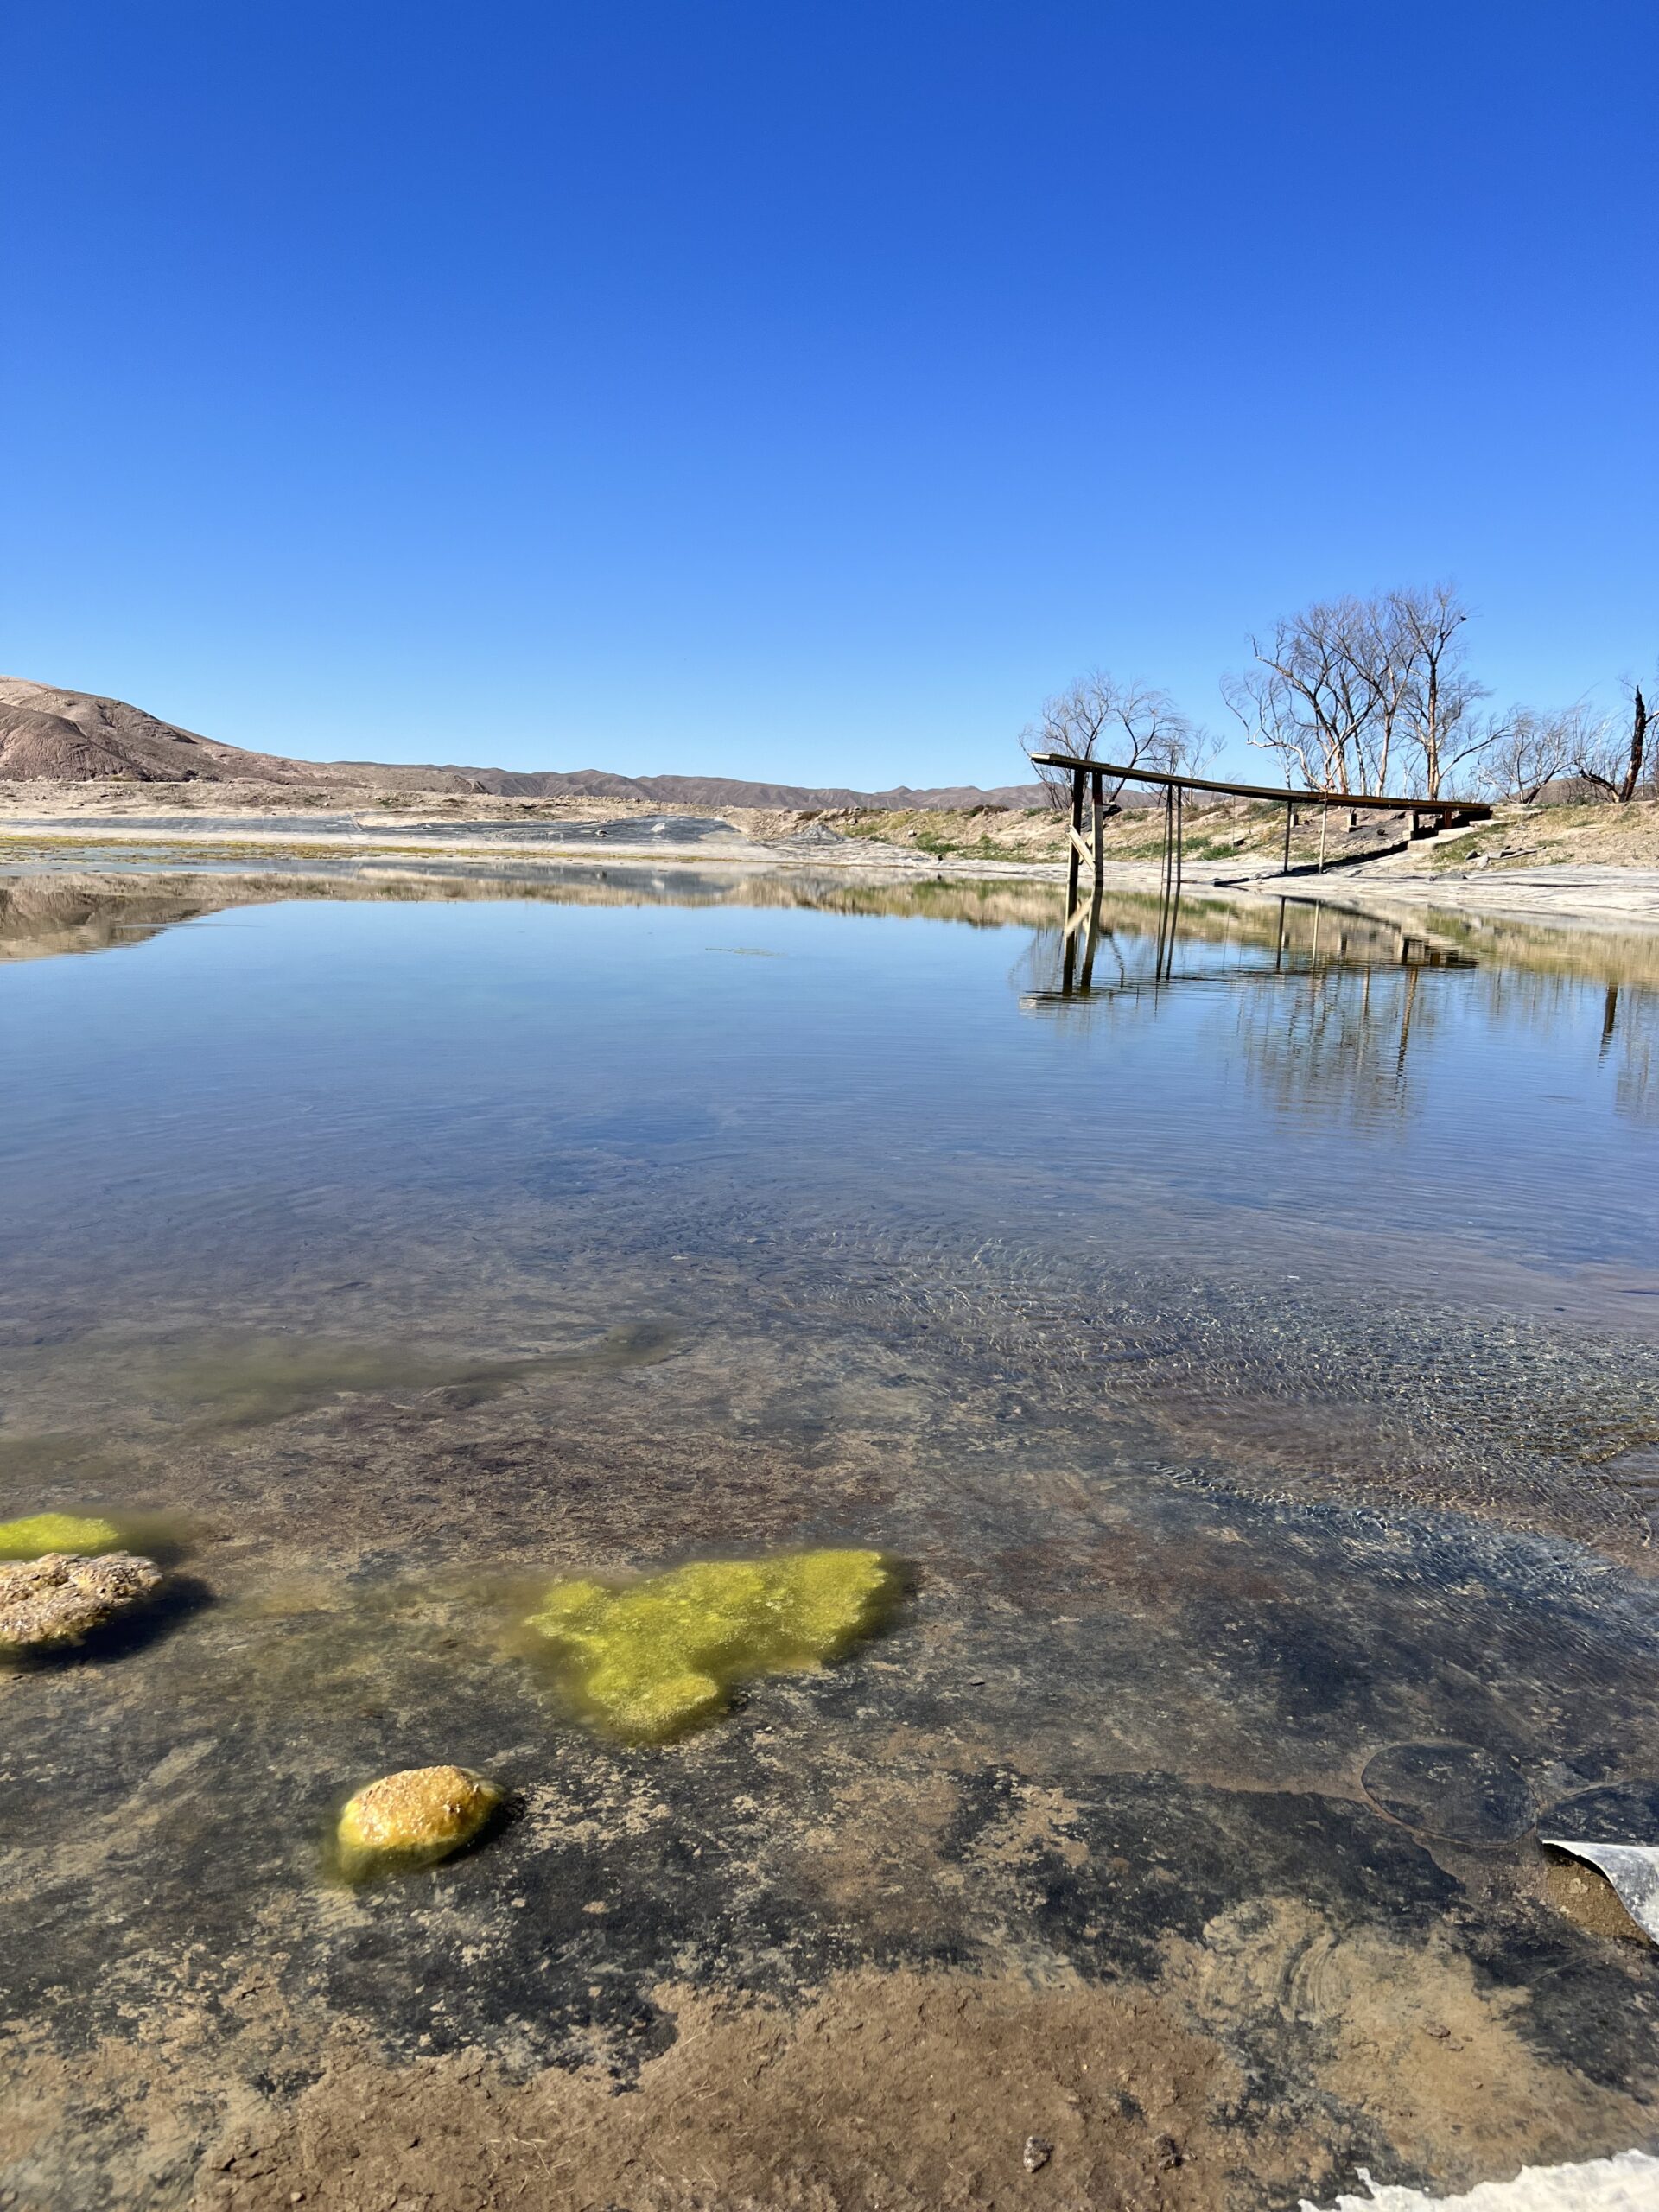 A Pond of Many Purposes: Collaborative Conservation on China Ranch